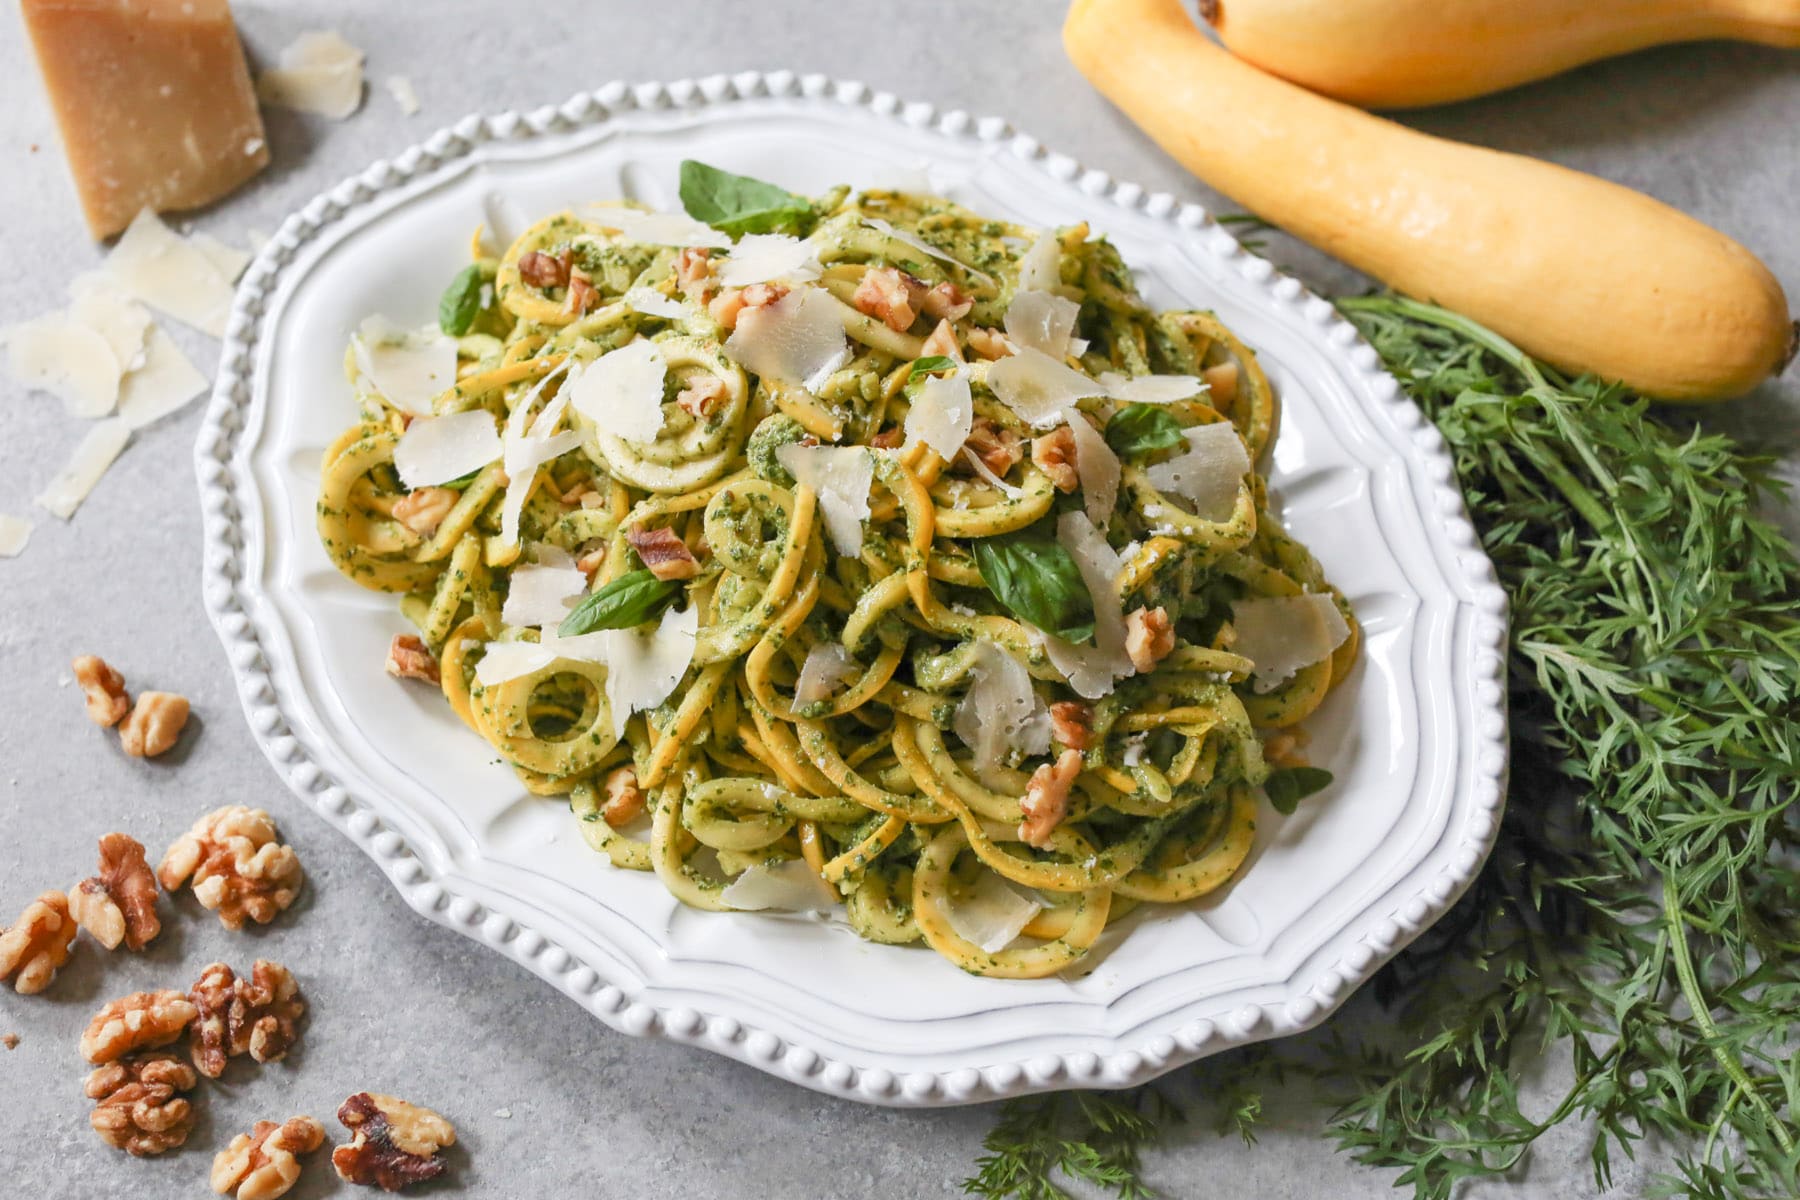 Summer-Squash-Noodle-Salad-with-Carrot-Top-Pesto-5